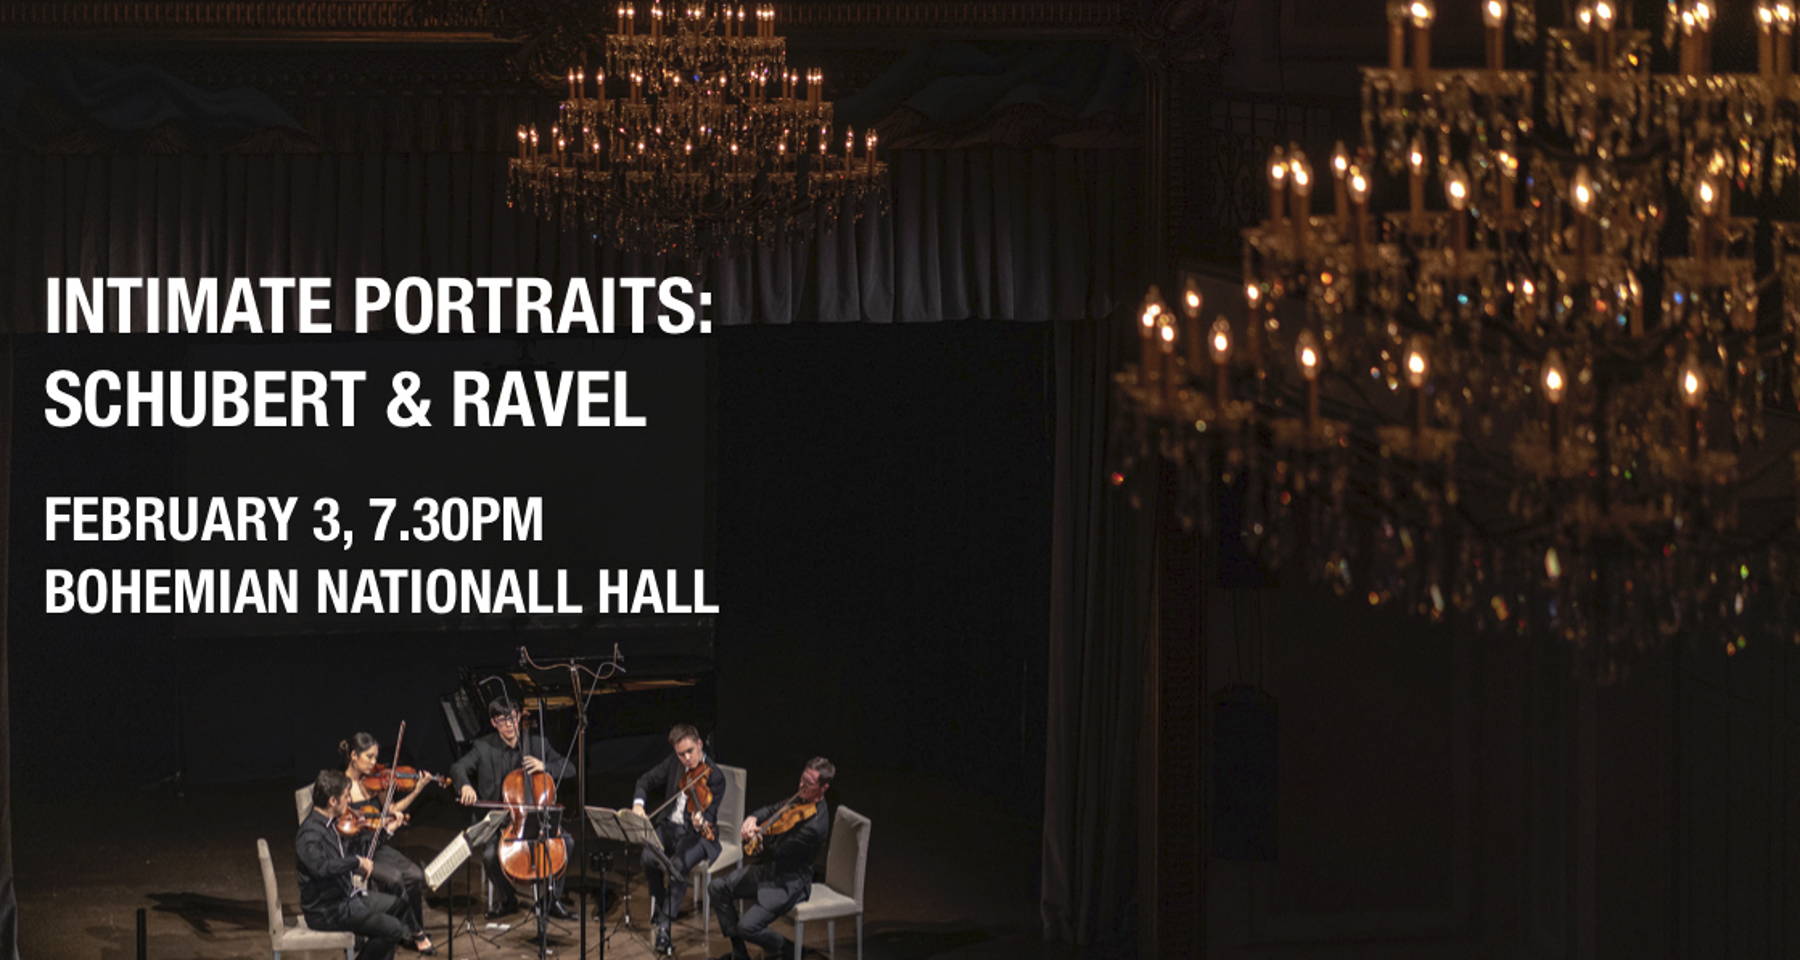 Hermitage Piano Trio performs Schubert and Ravel at Bohemian National Hall